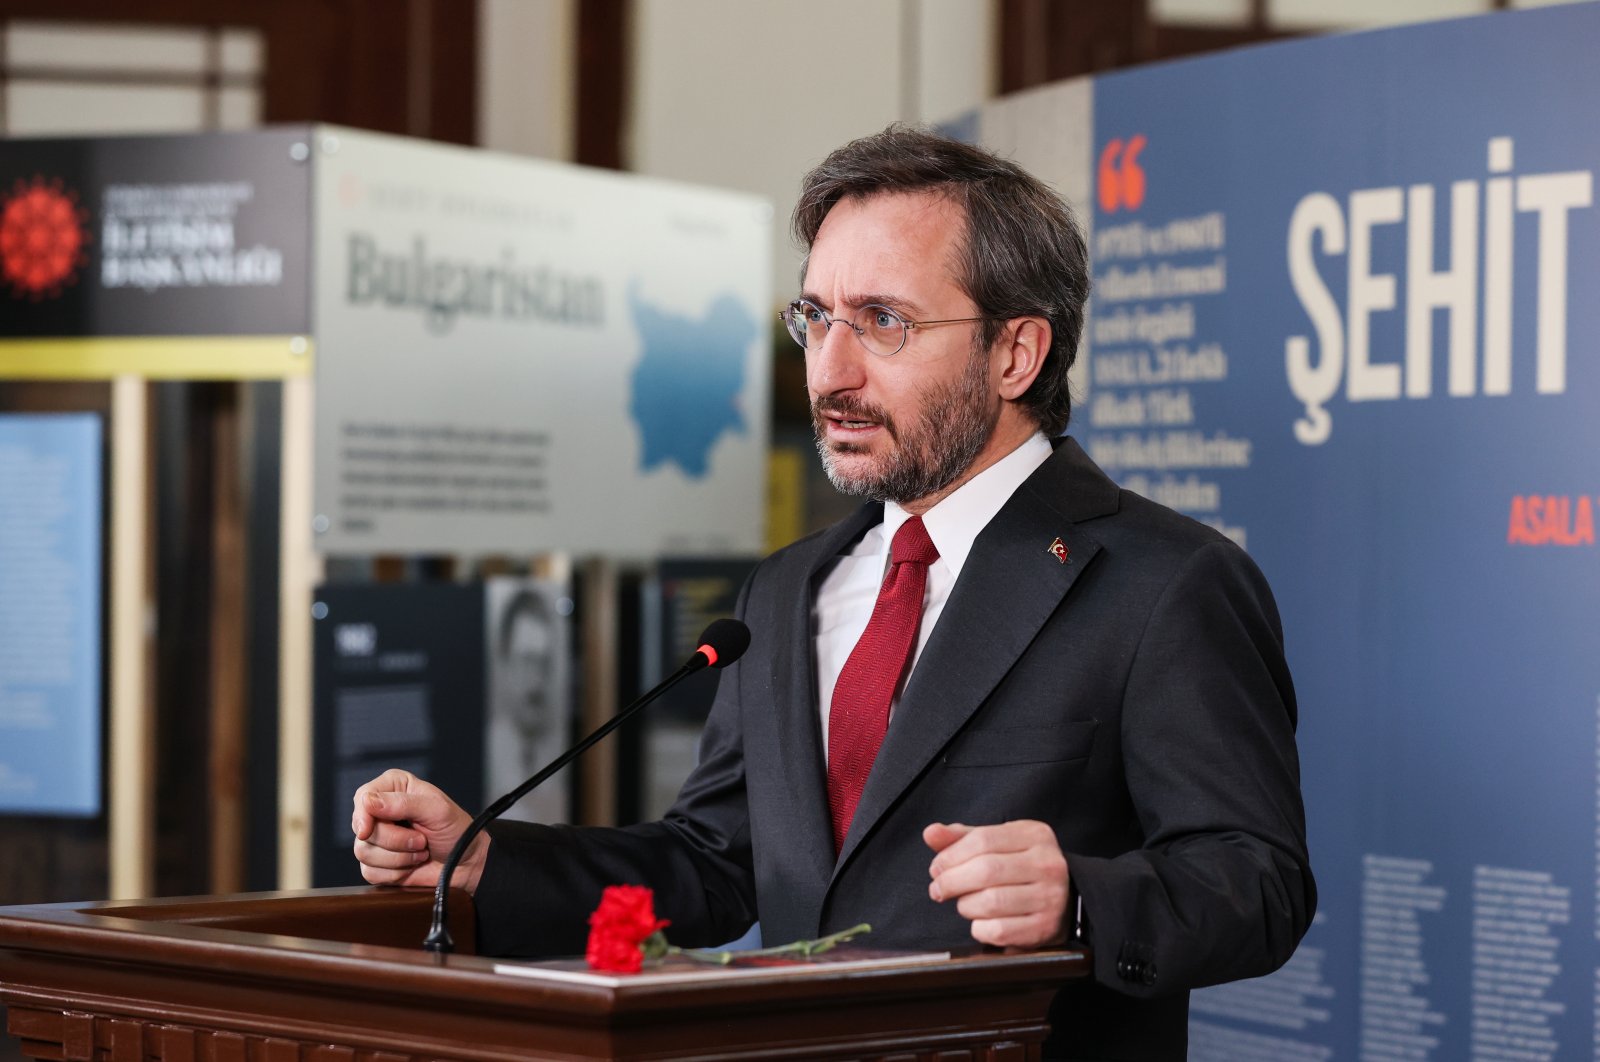 Turkish Presidency Communications Director Fahrettin Altun delivers a speech at an exhibition held in memory of Turkish diplomats killed by Armenian terror groups, in the capital Ankara, Turkey, April 26, 2021. (AA Photo)